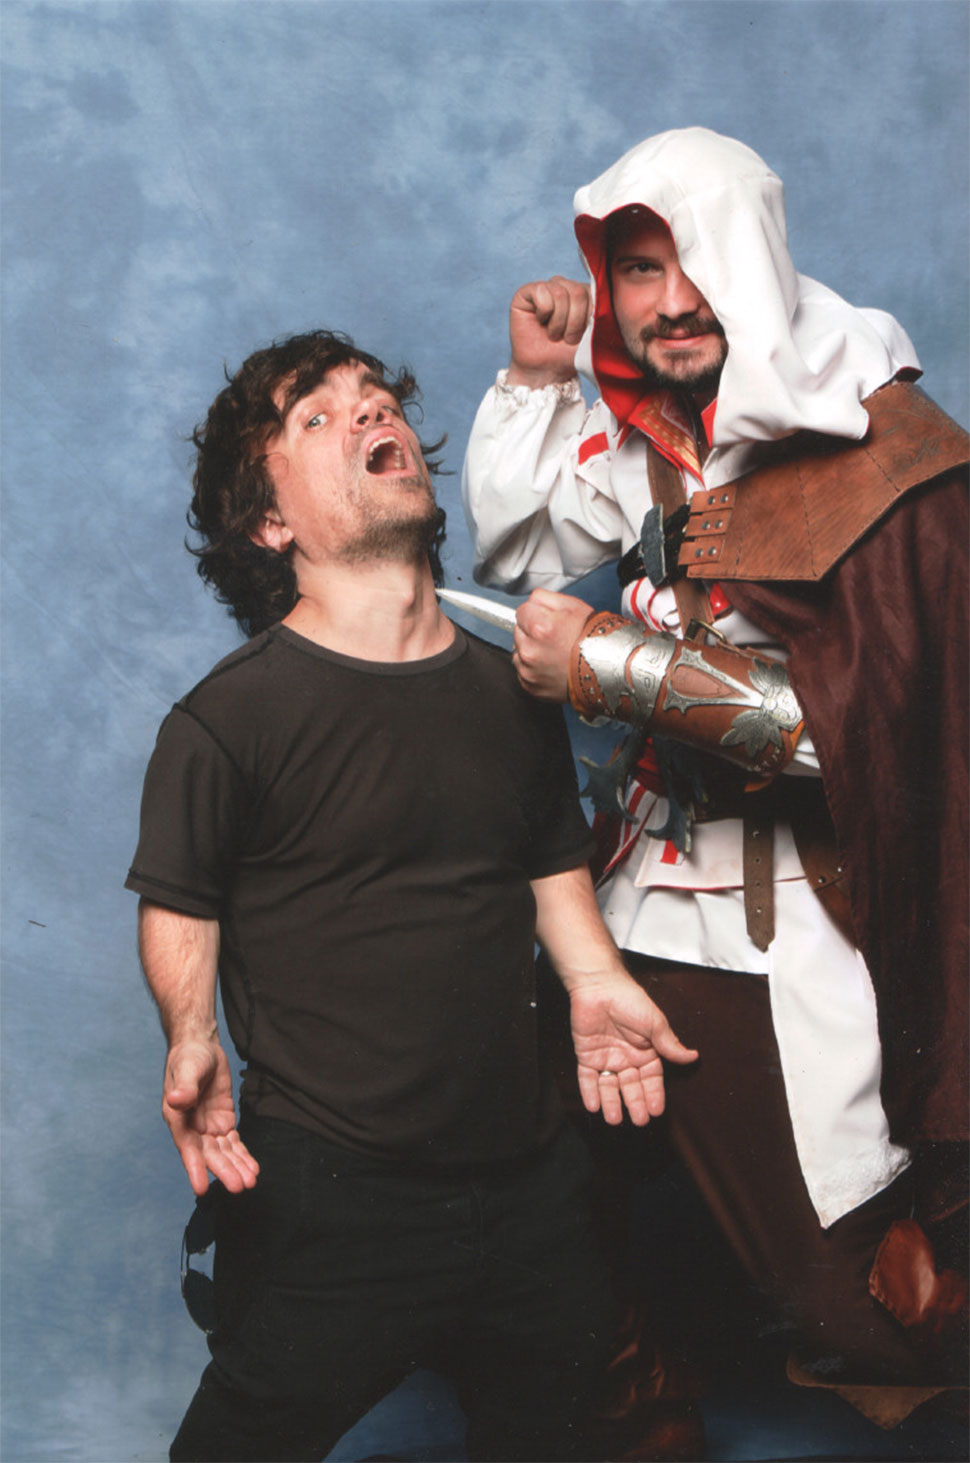 Ezio, Your Next Target Is… Tyrion Lannister